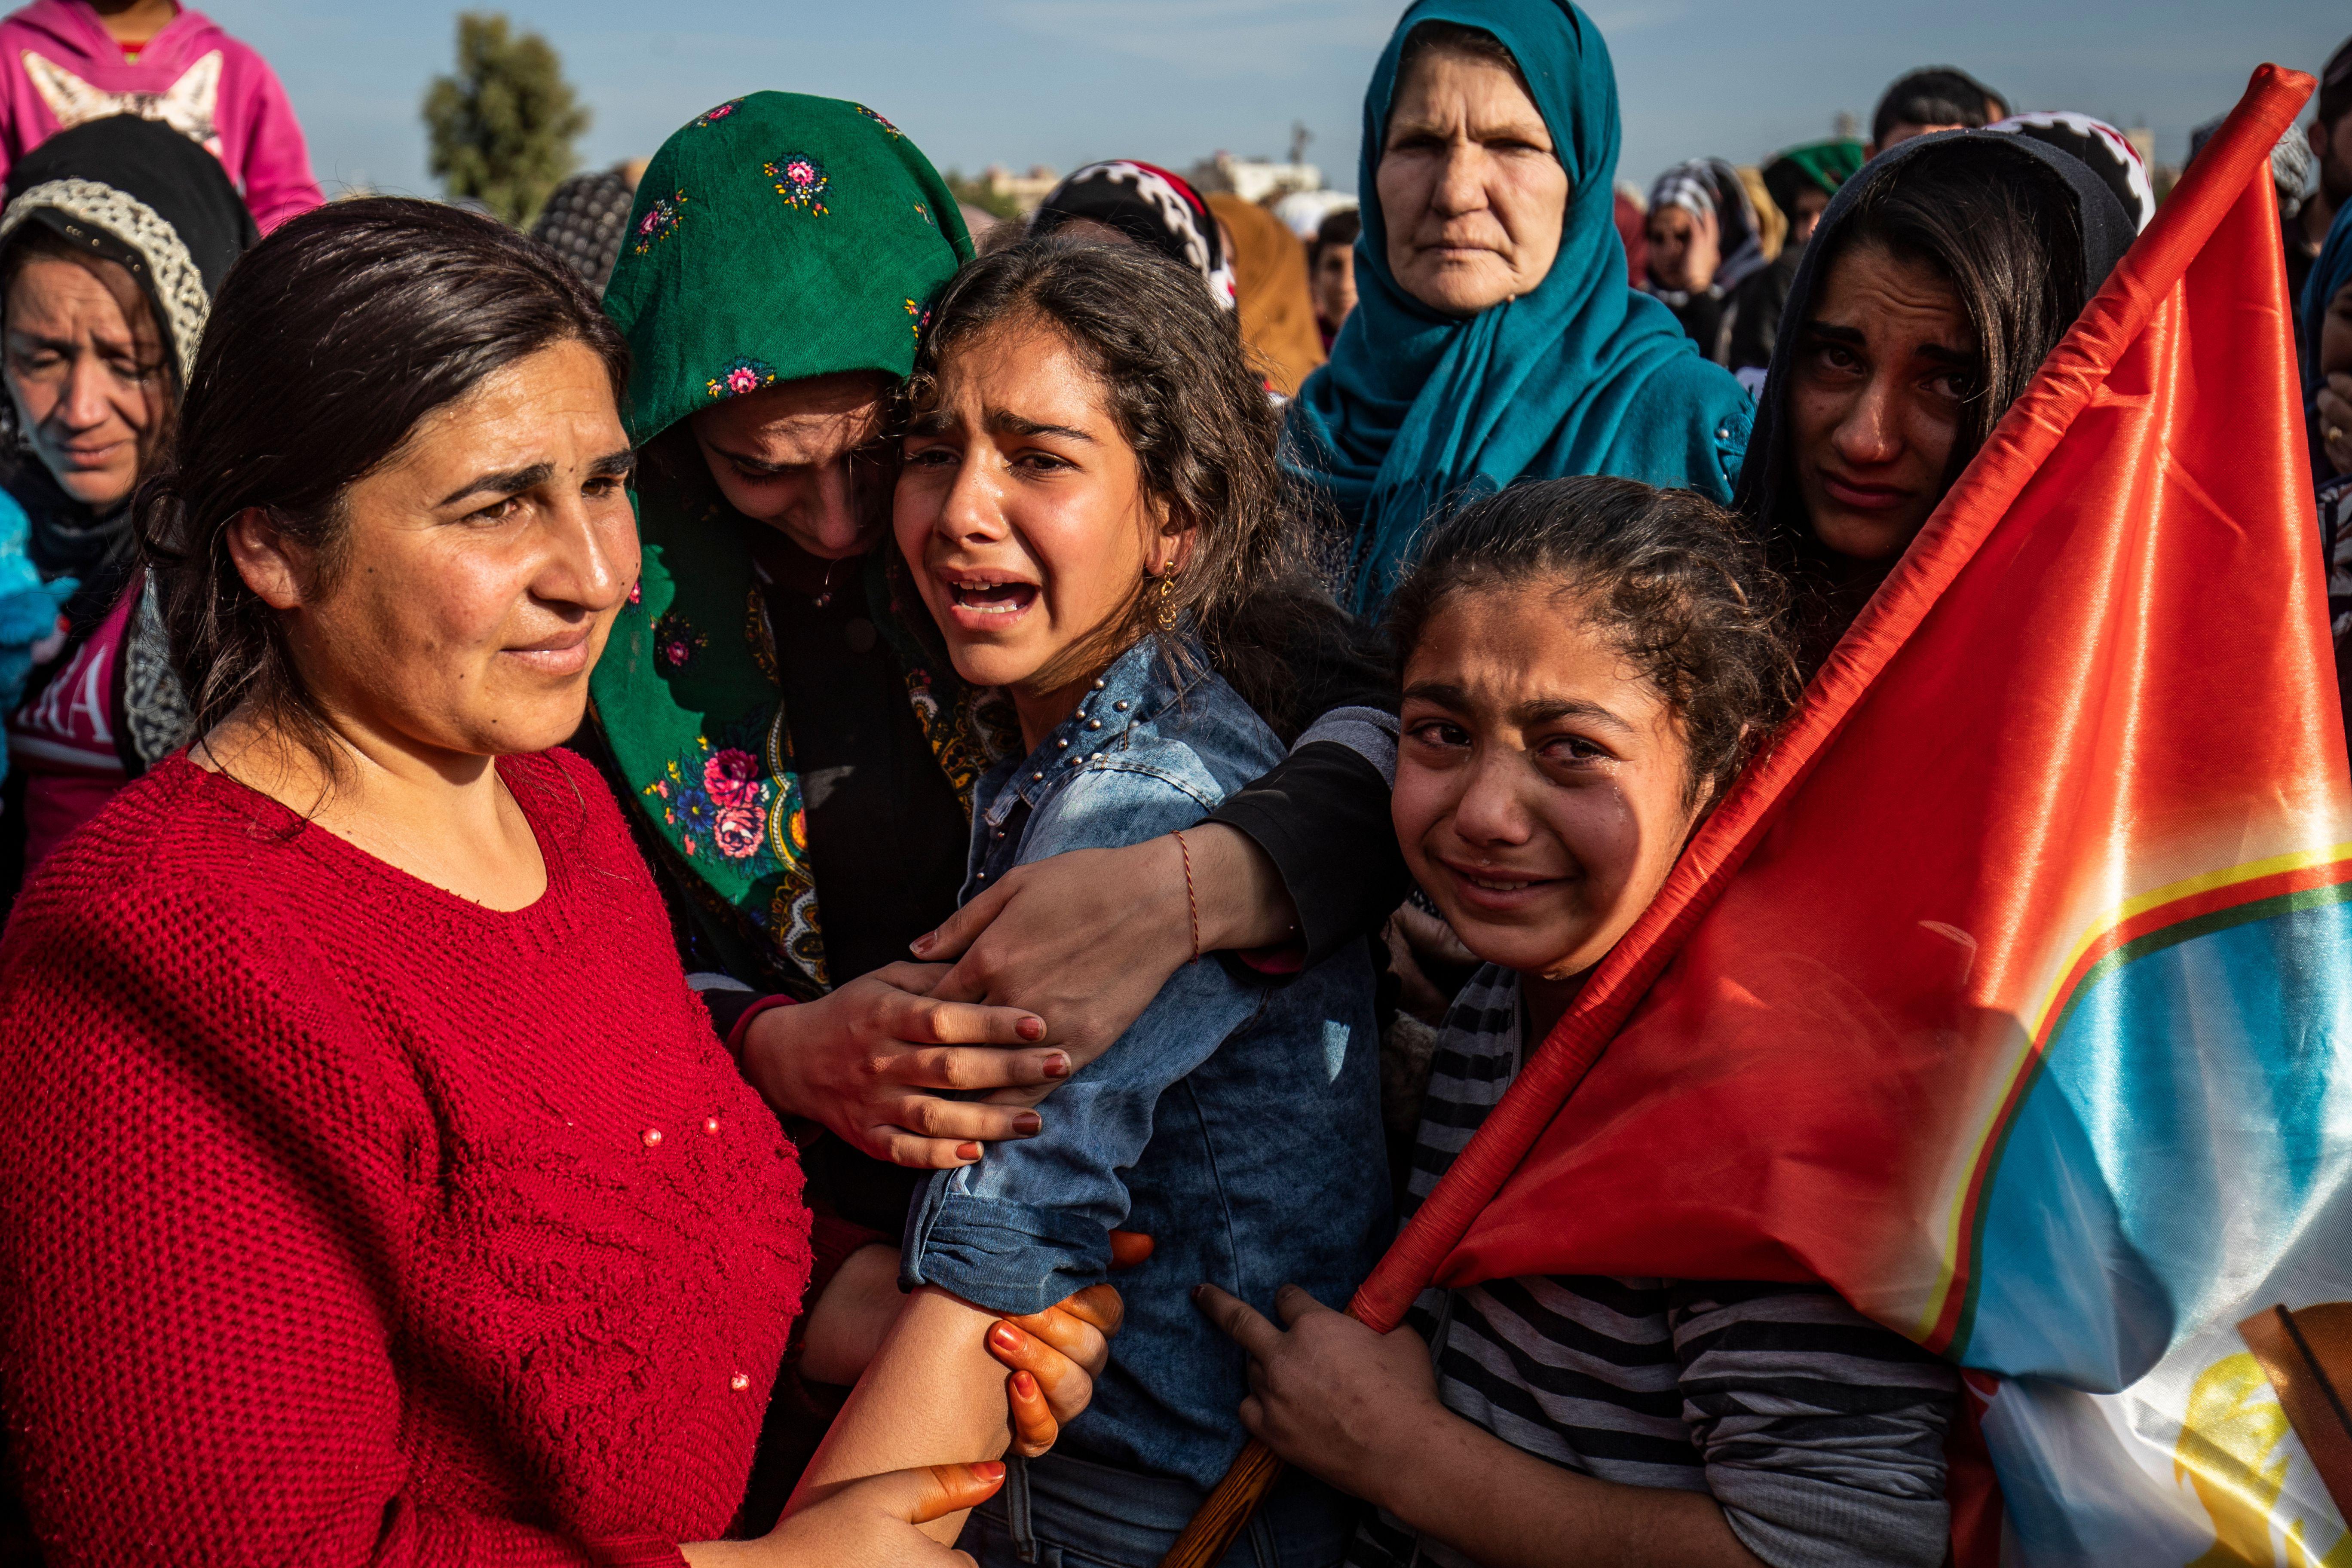 Women and children crying. One is holding a flag.